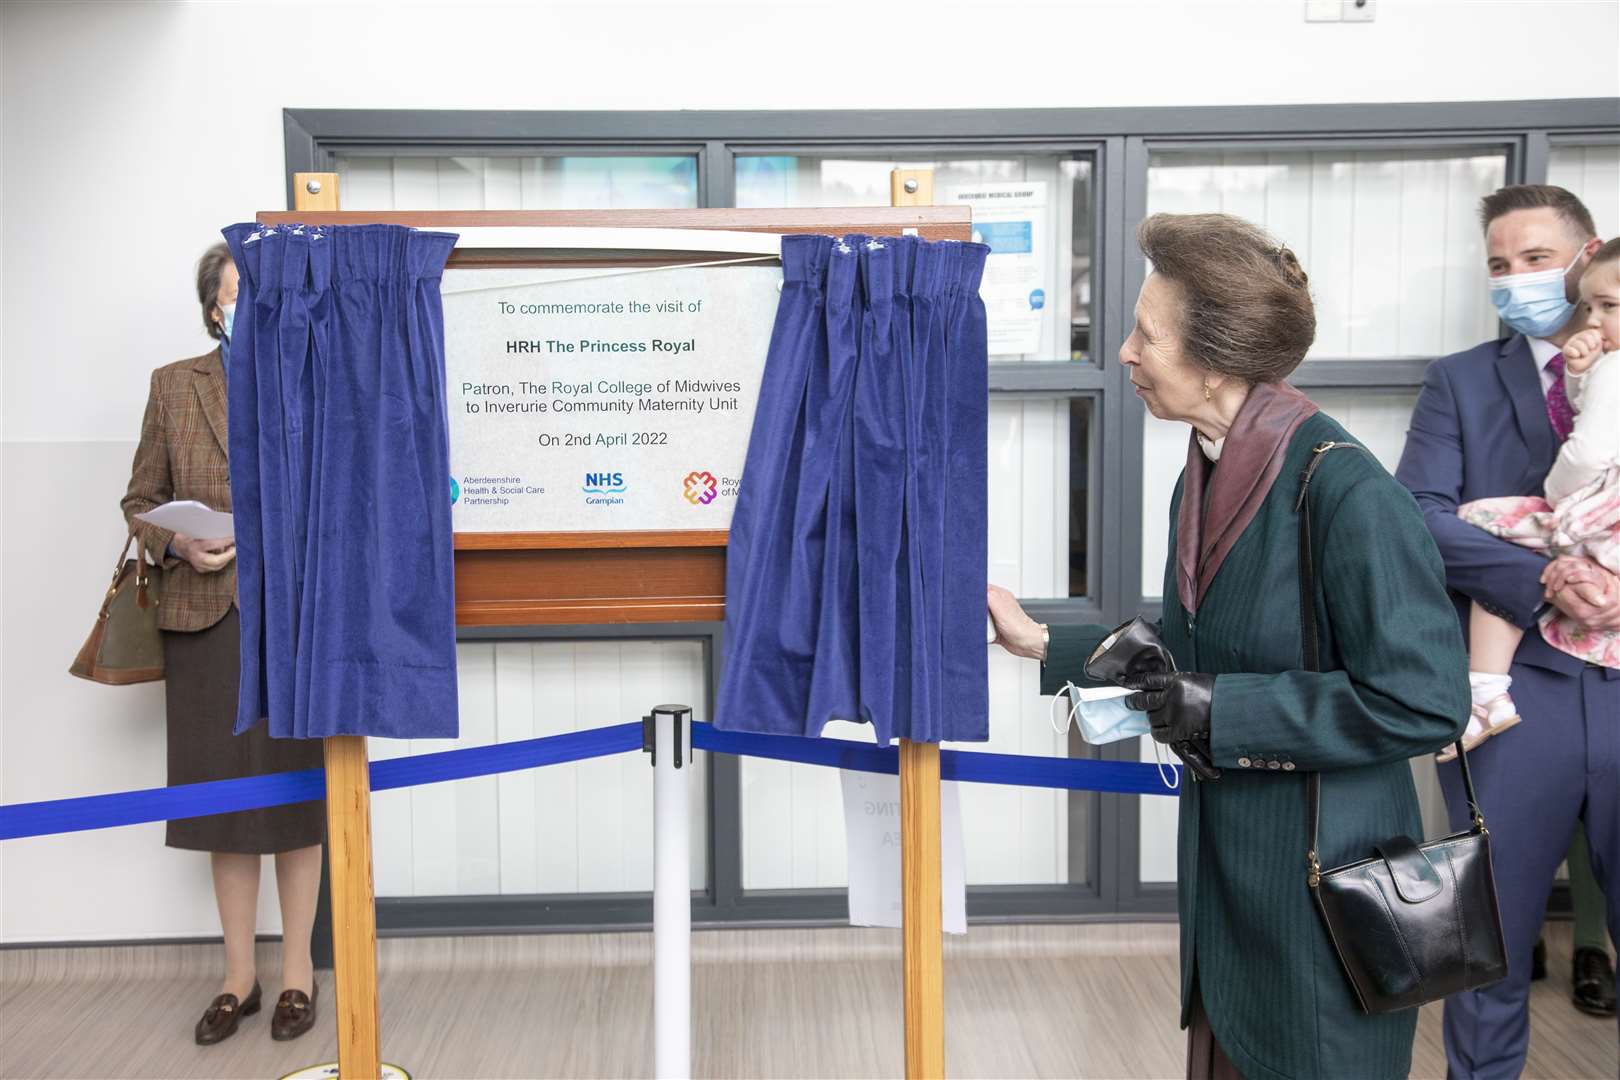 HRH Princess Royal unveiled a plaque during her visit. Image courtesy of Thomas Haywood